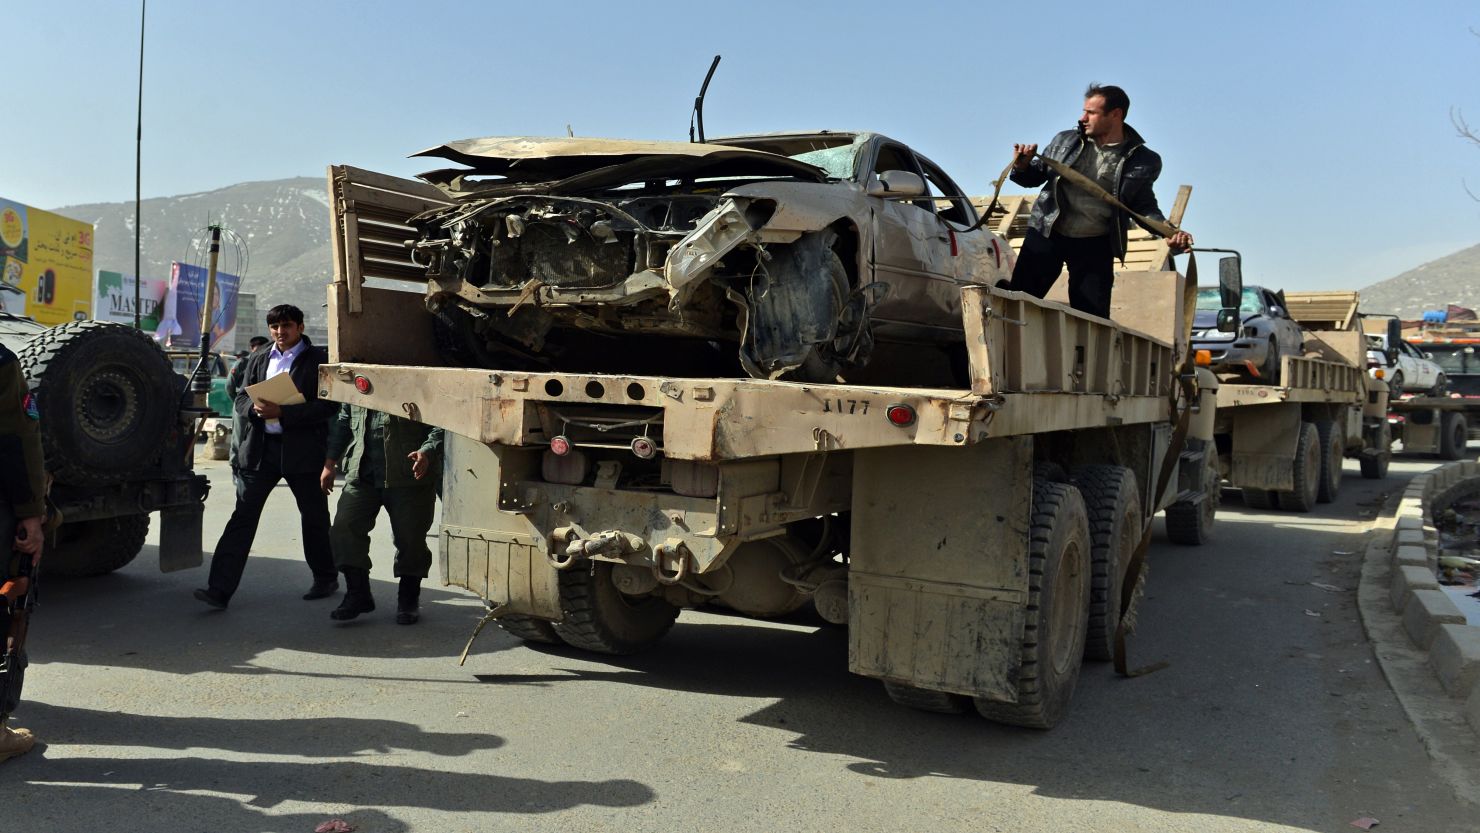 Afghanistan National Army soldiers remove a destroyed car at the site of a suicide attack next to the Defense Ministry in Kabul.